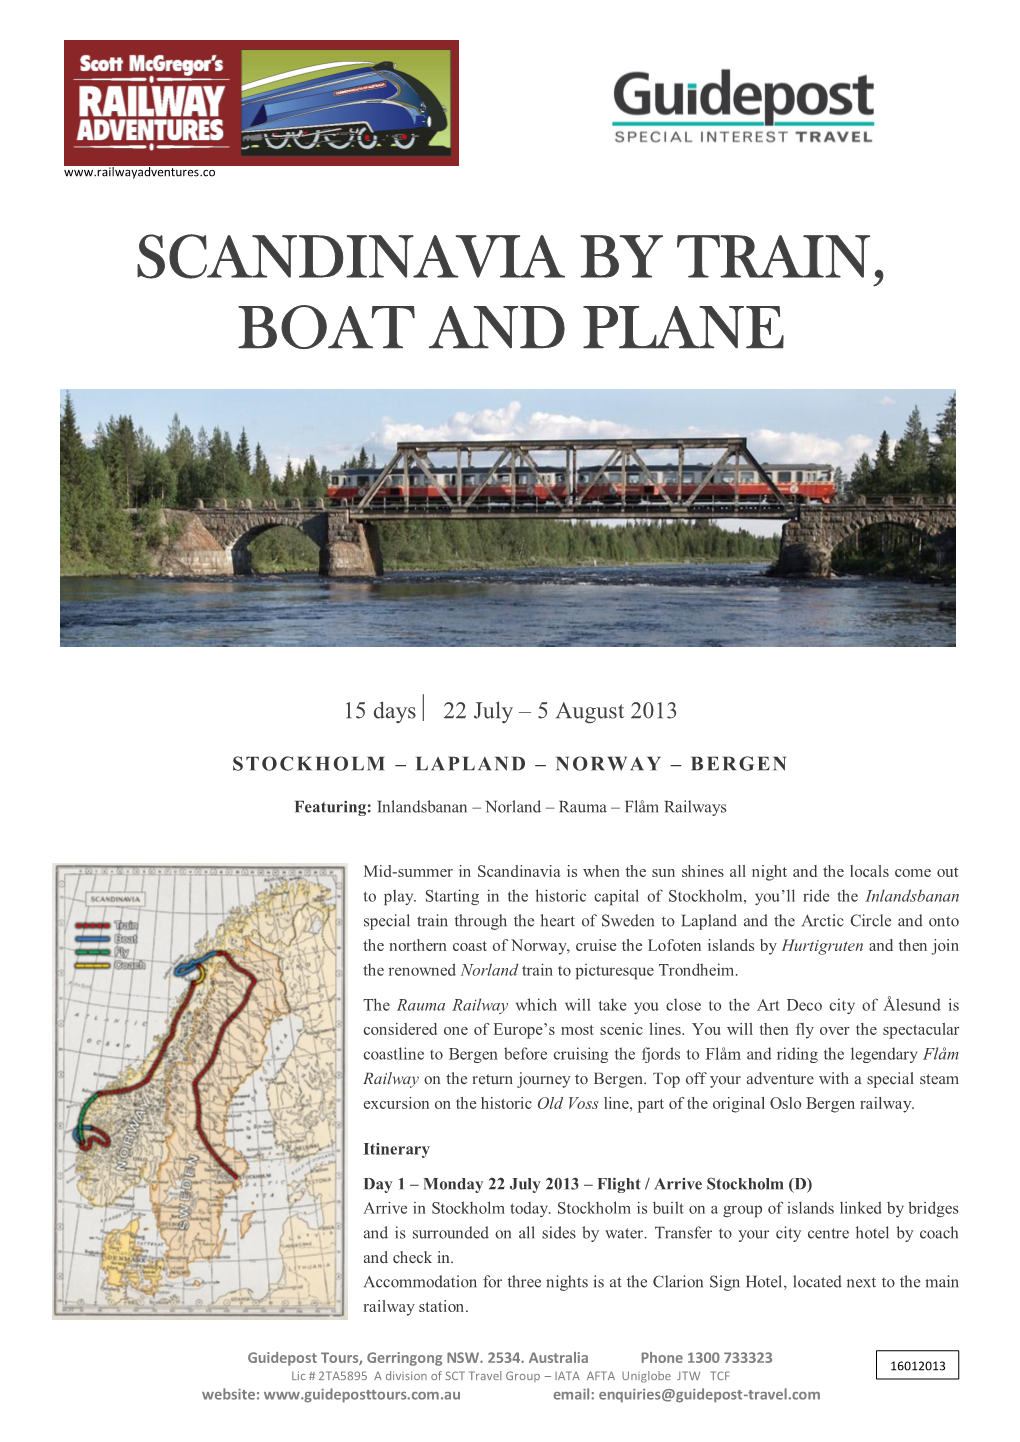 Scandinavia by Train, Boat and Plane